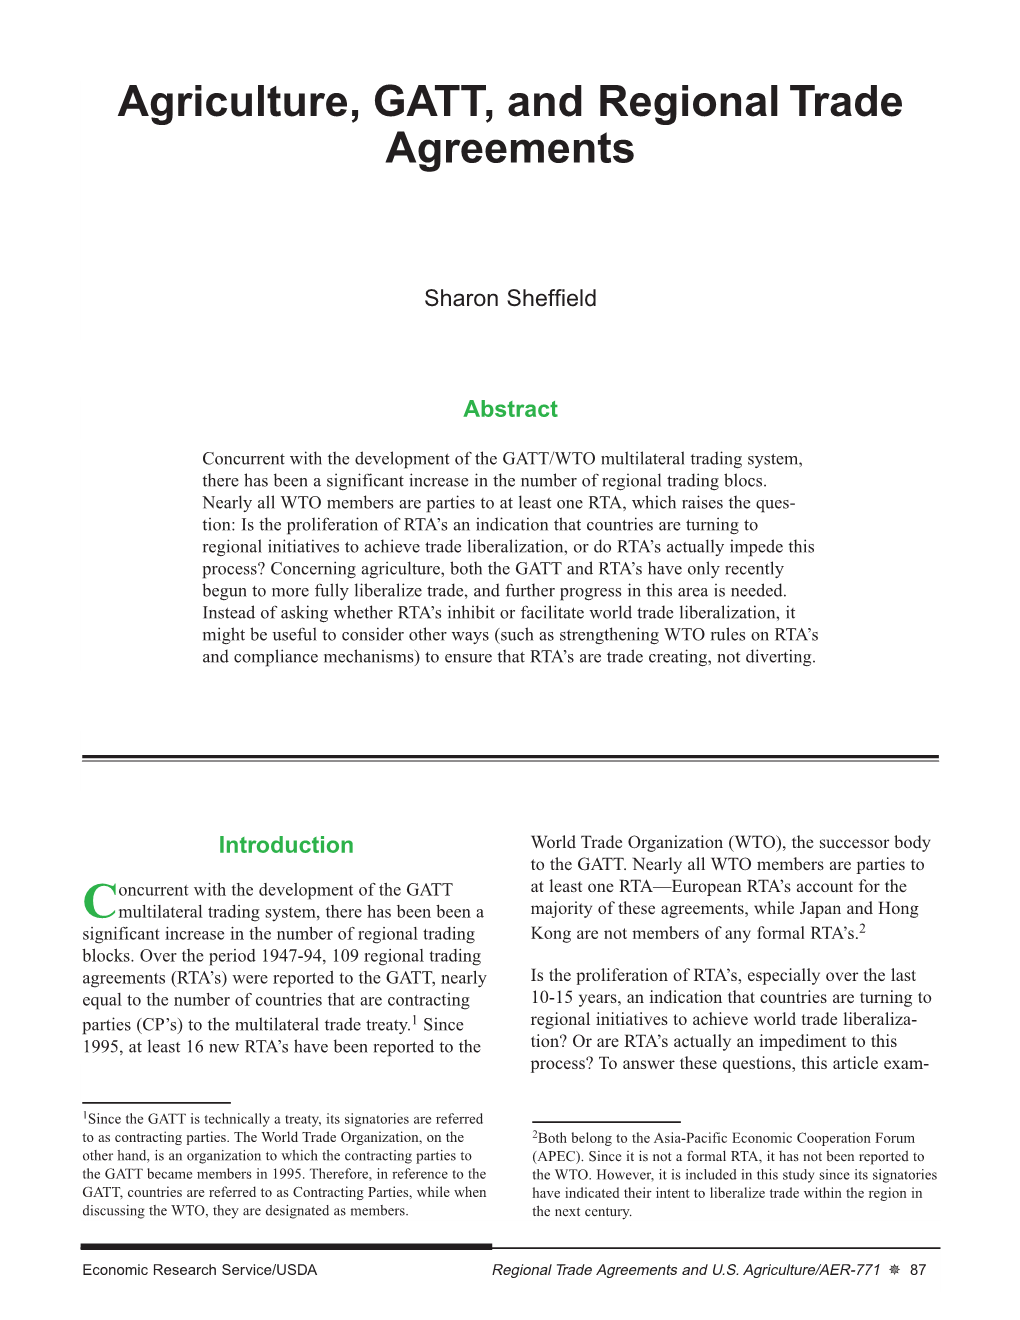 Agriculture, GATT, and Regional Trade Agreements